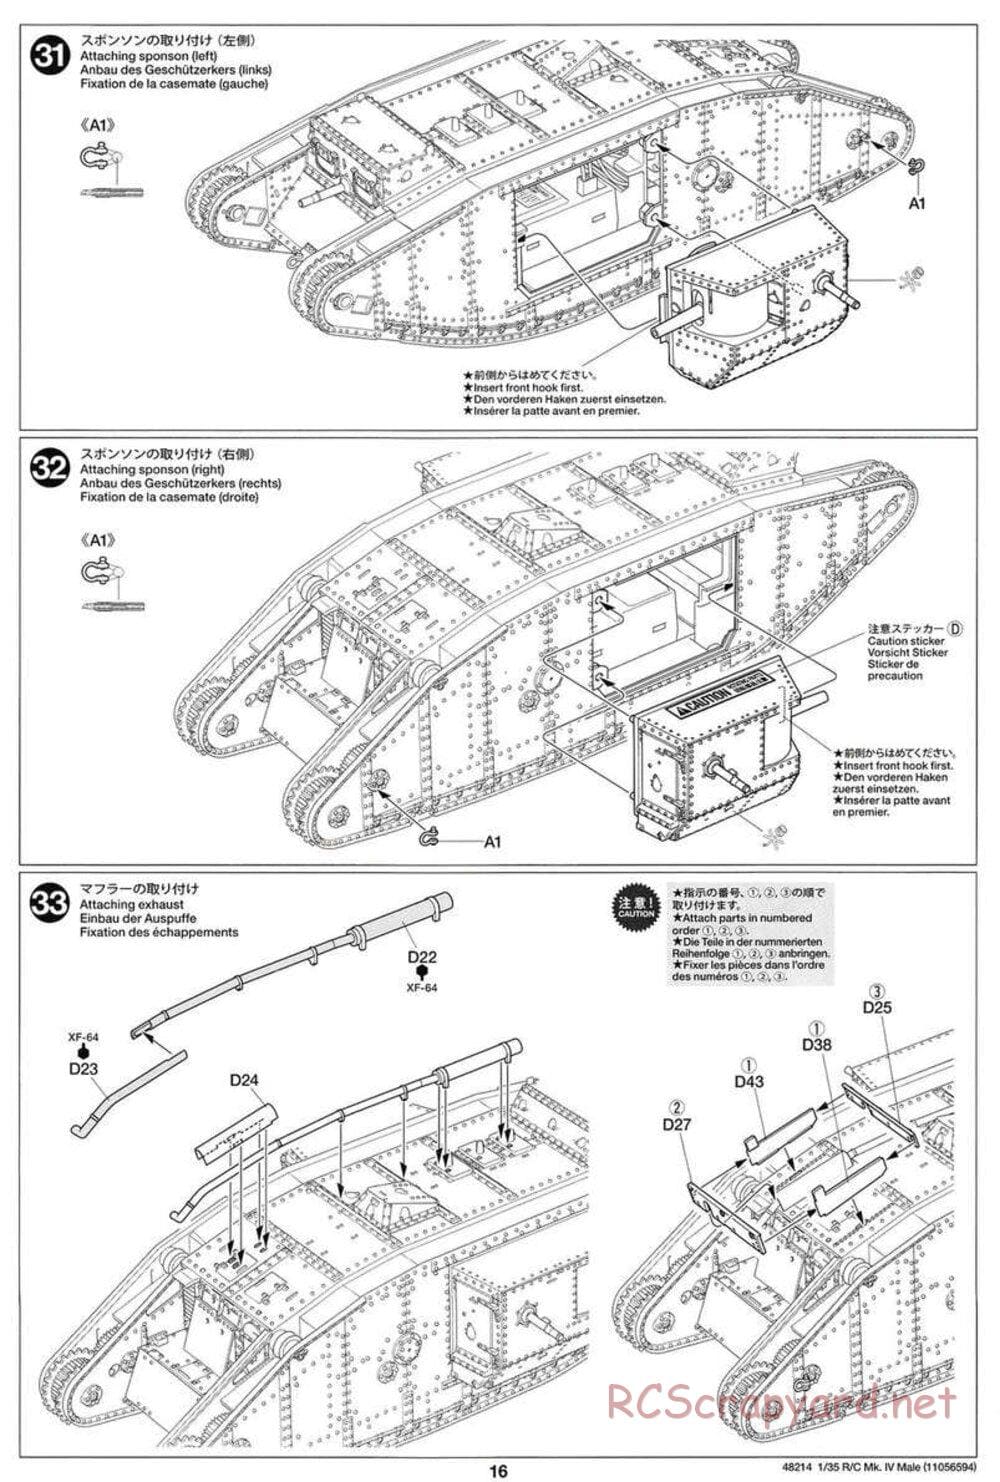 Tamiya - WWI British Tank Mark IV Male - 1/35 Scale Chassis - Manual - Page 16